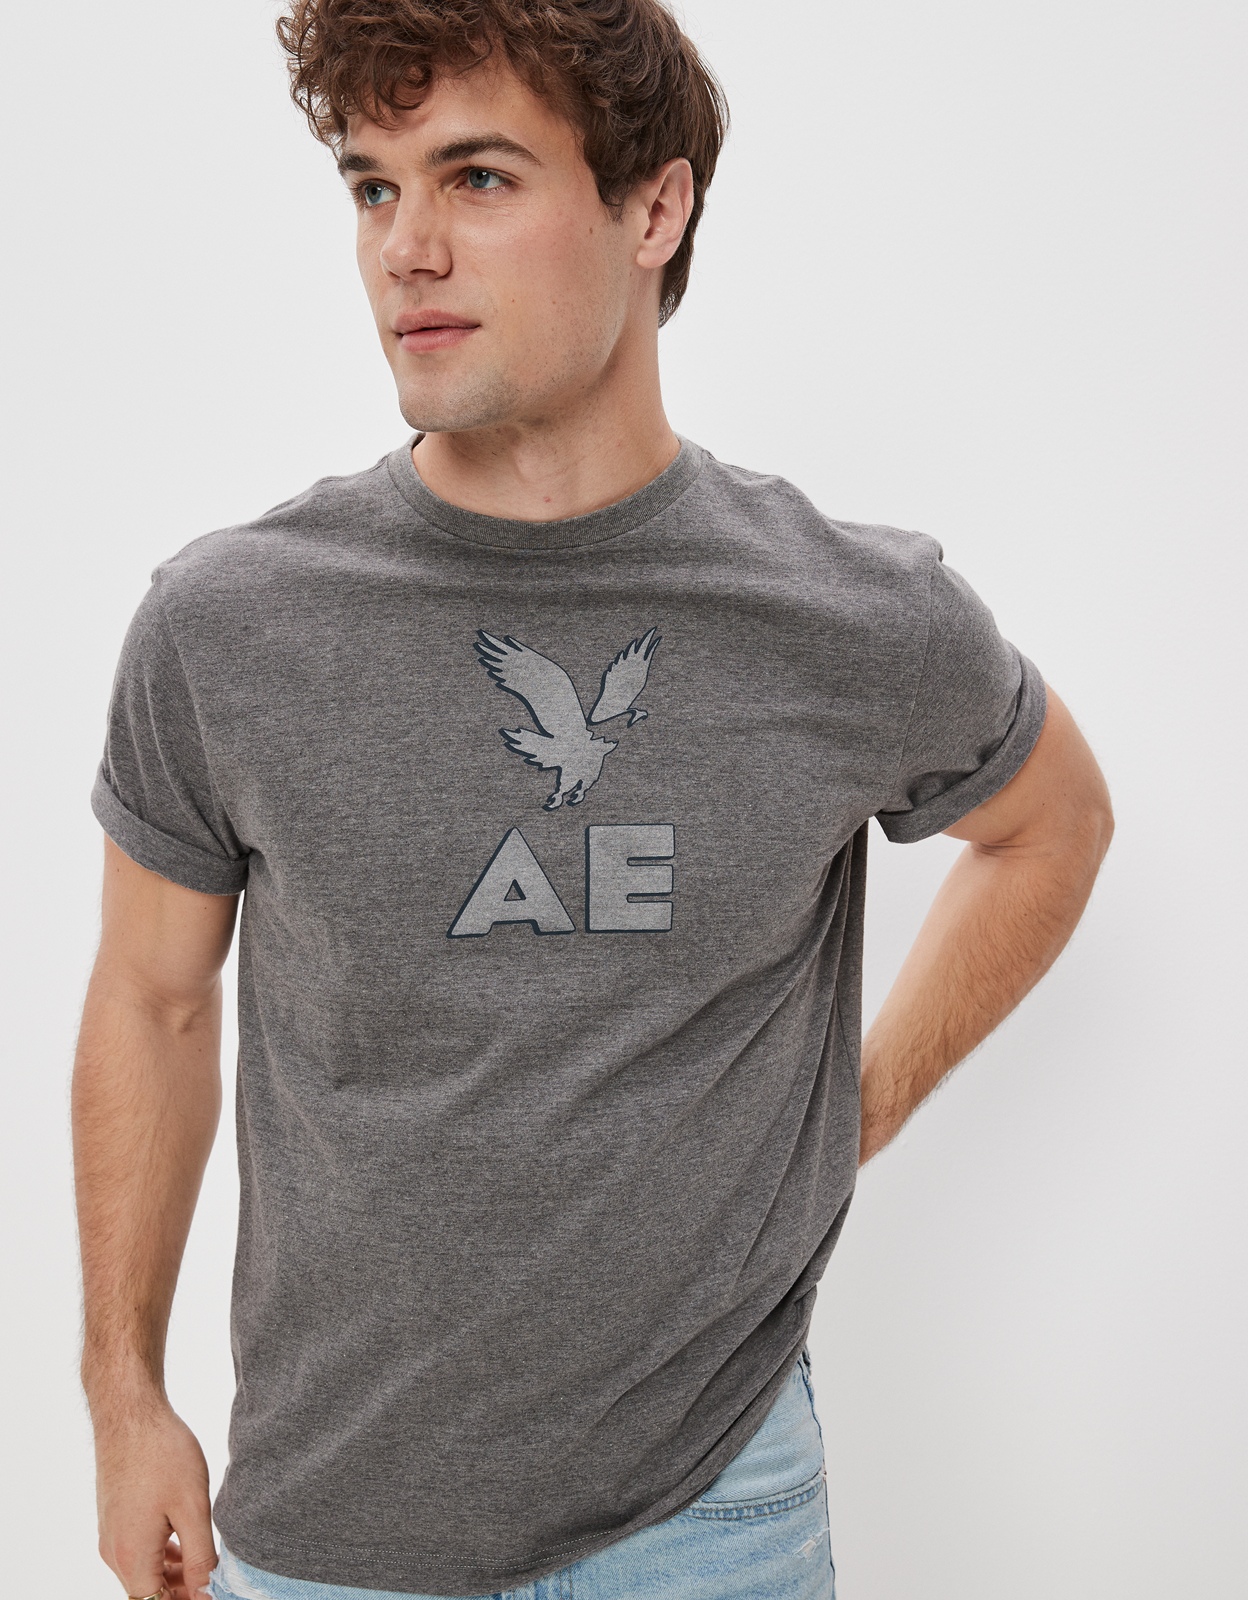 American Eagle, Shop American Eagle t-shirts, jeans and shirts